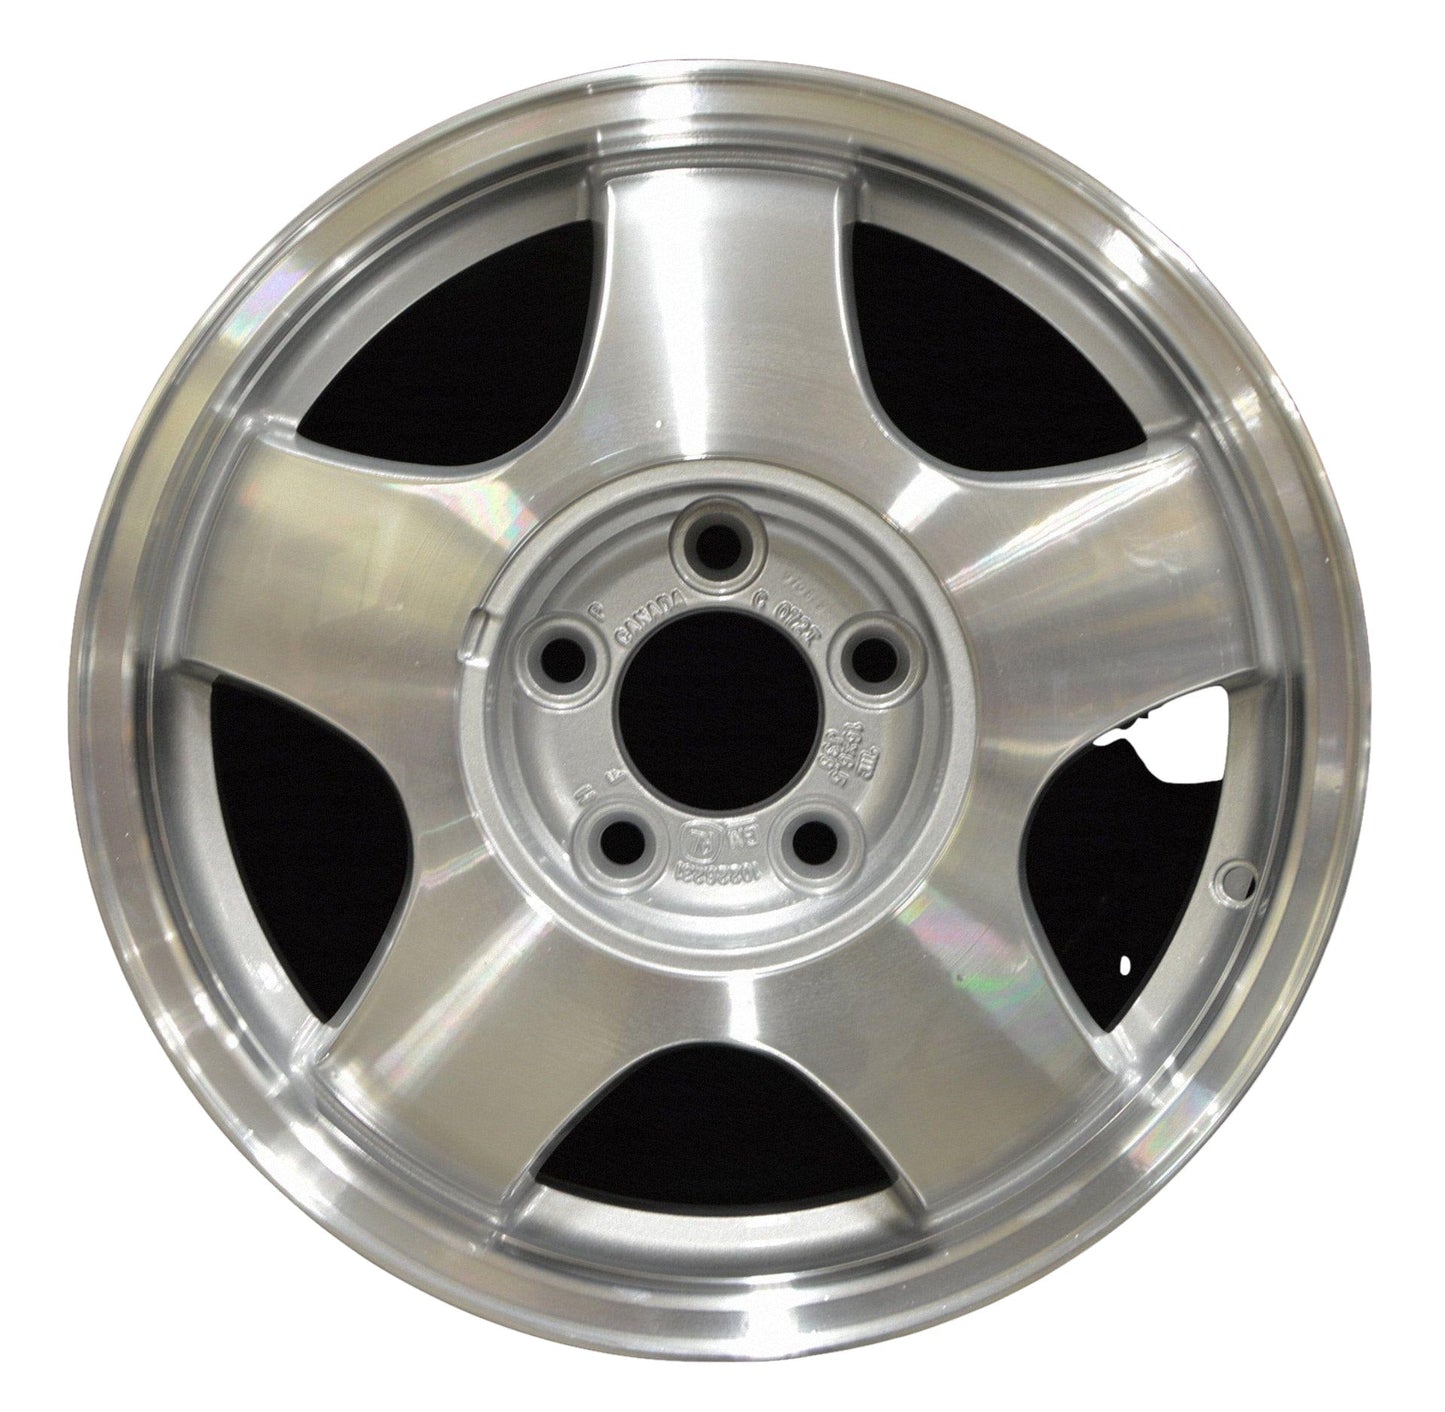 Chevrolet Monte Carlo  1998, 1999 Factory OEM Car Wheel Size 16x6.5 Alloy WAO.5067.PS02.MA